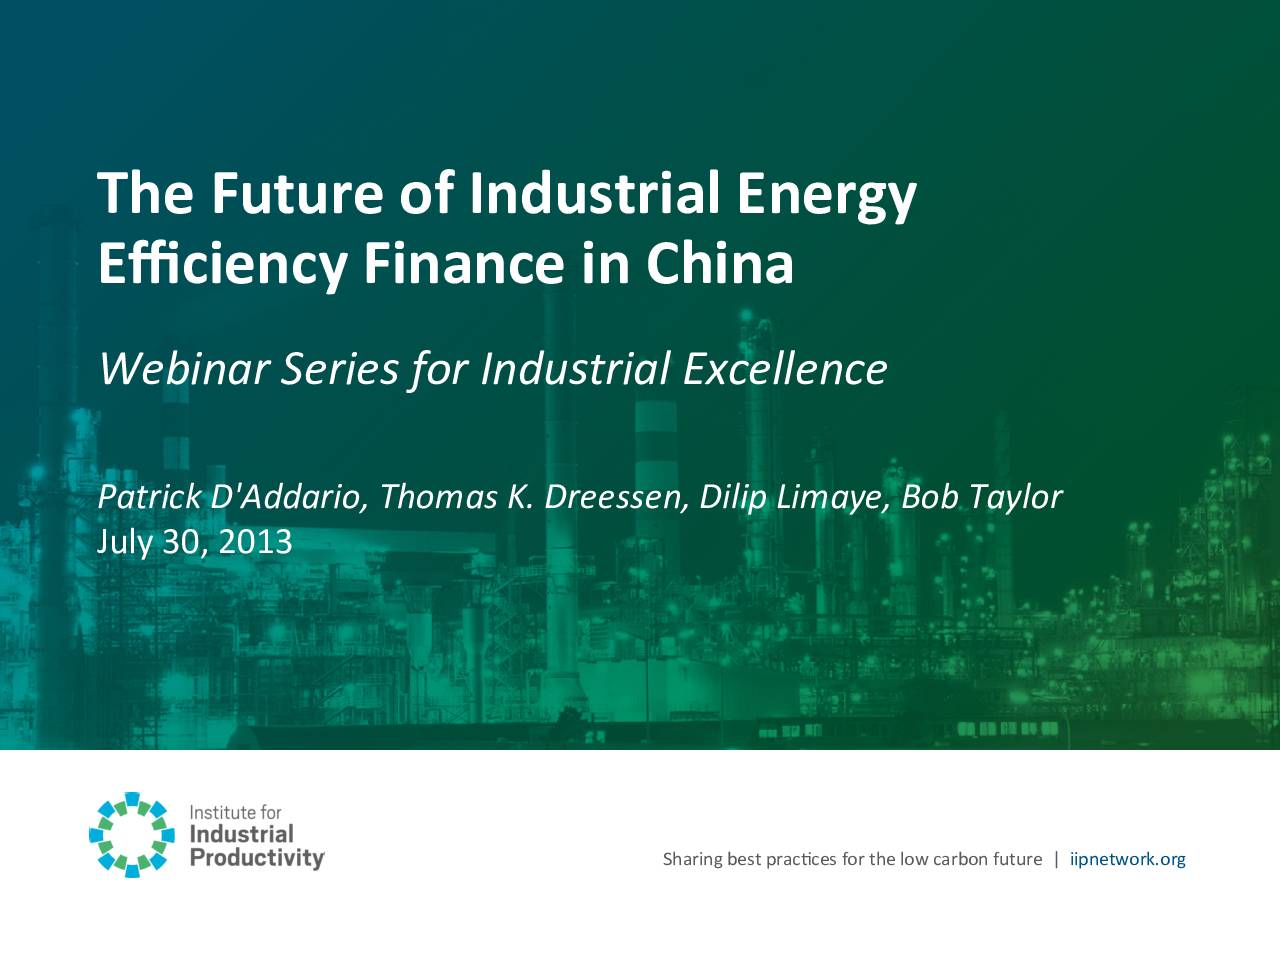 The Future of Industrial Energy Efficiency Finance in China